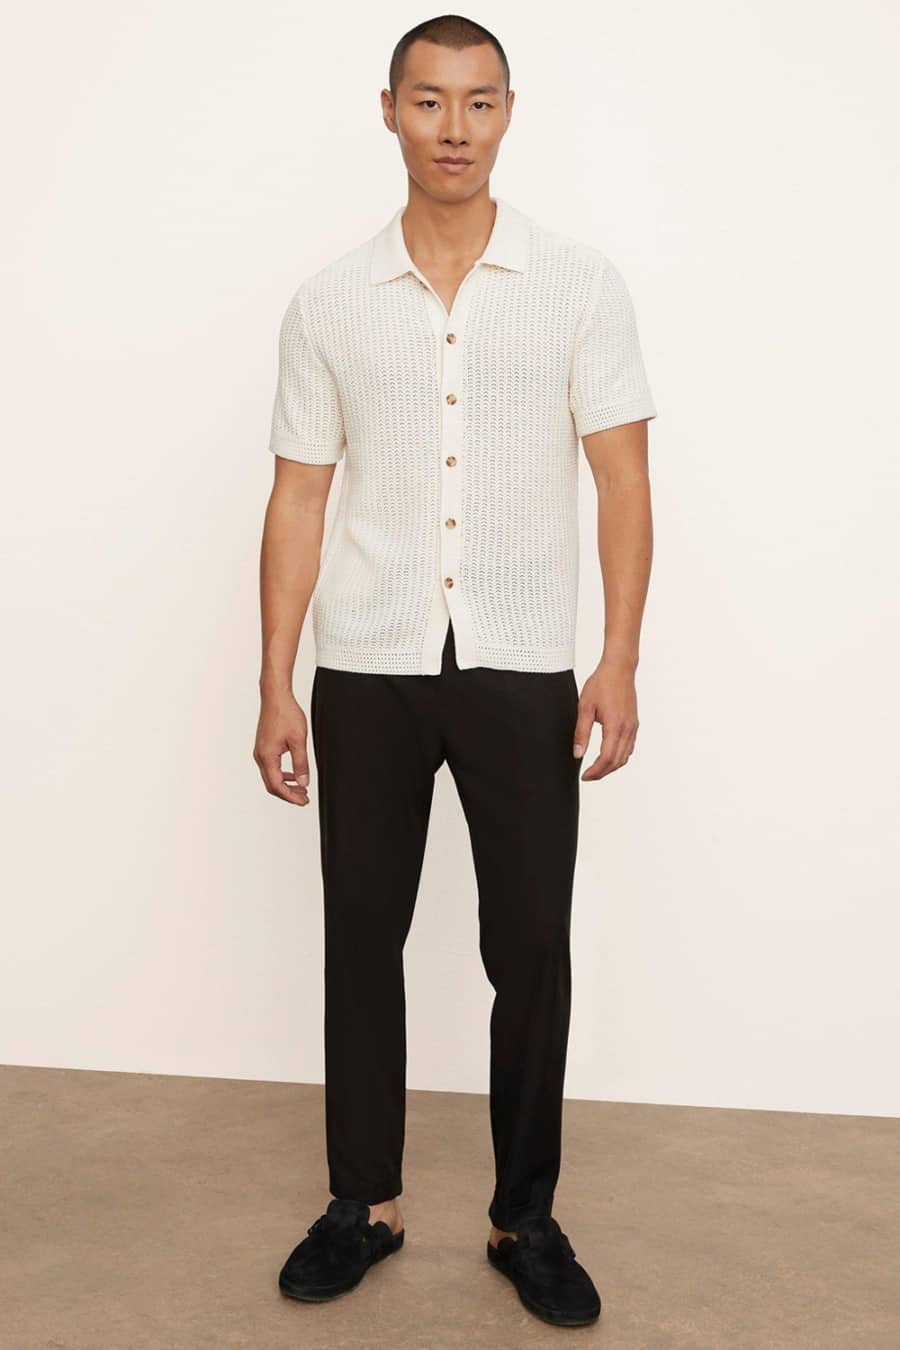 Men's textured short sleeve shirt, black trousers and shoes outfit